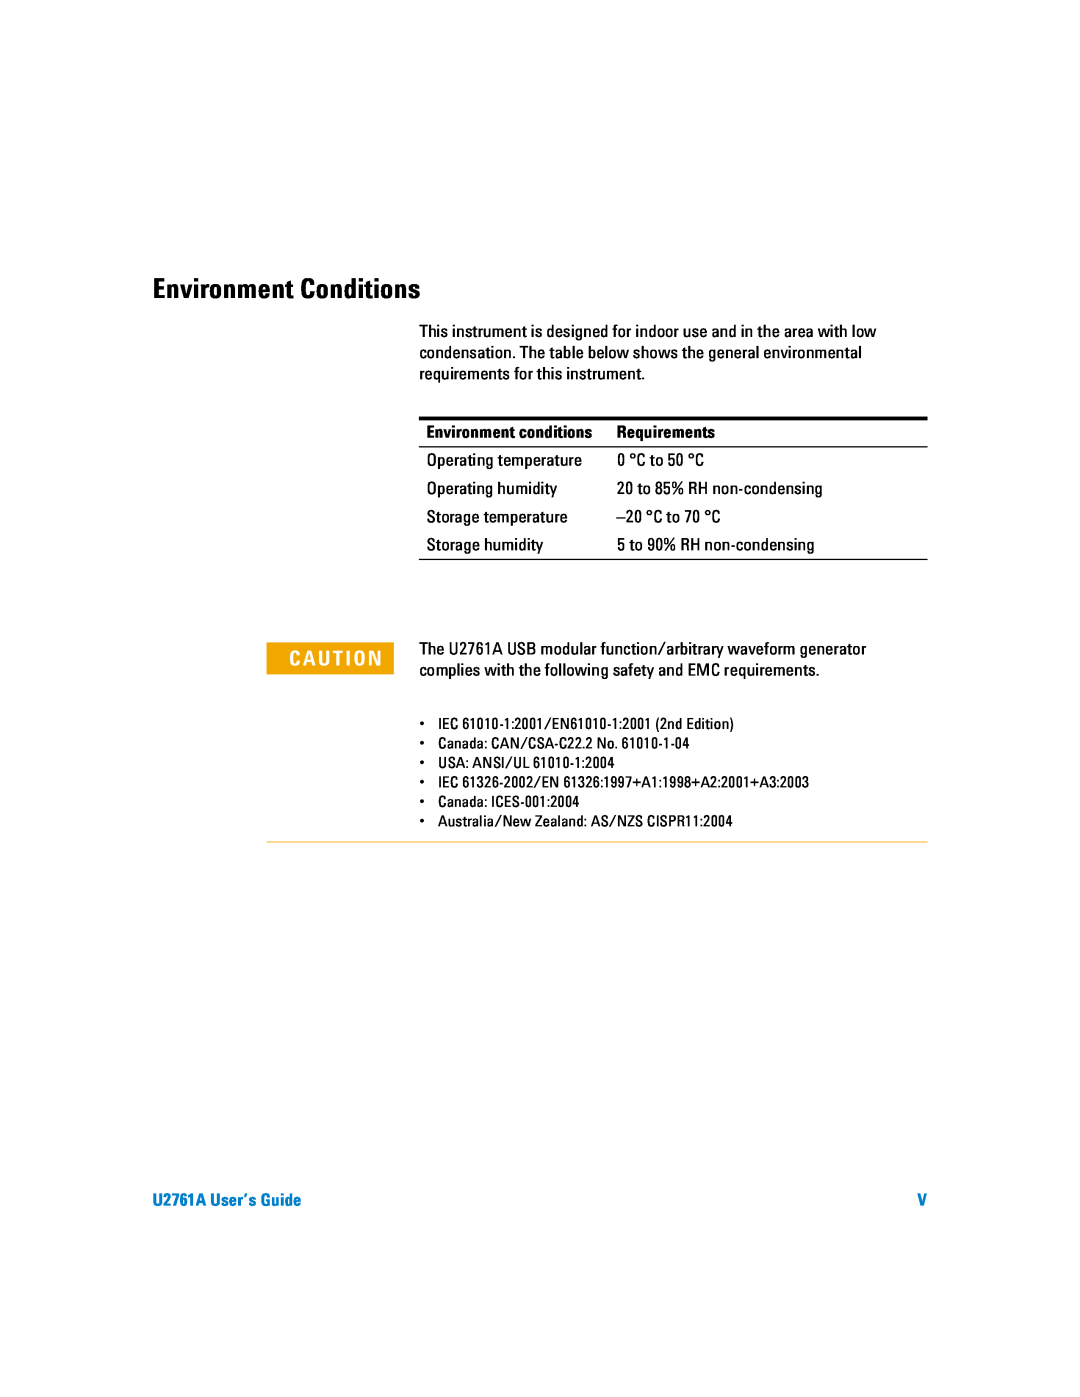 Agilent Technologies manual Environment Conditions, Requirements, U2761A User’s Guide 